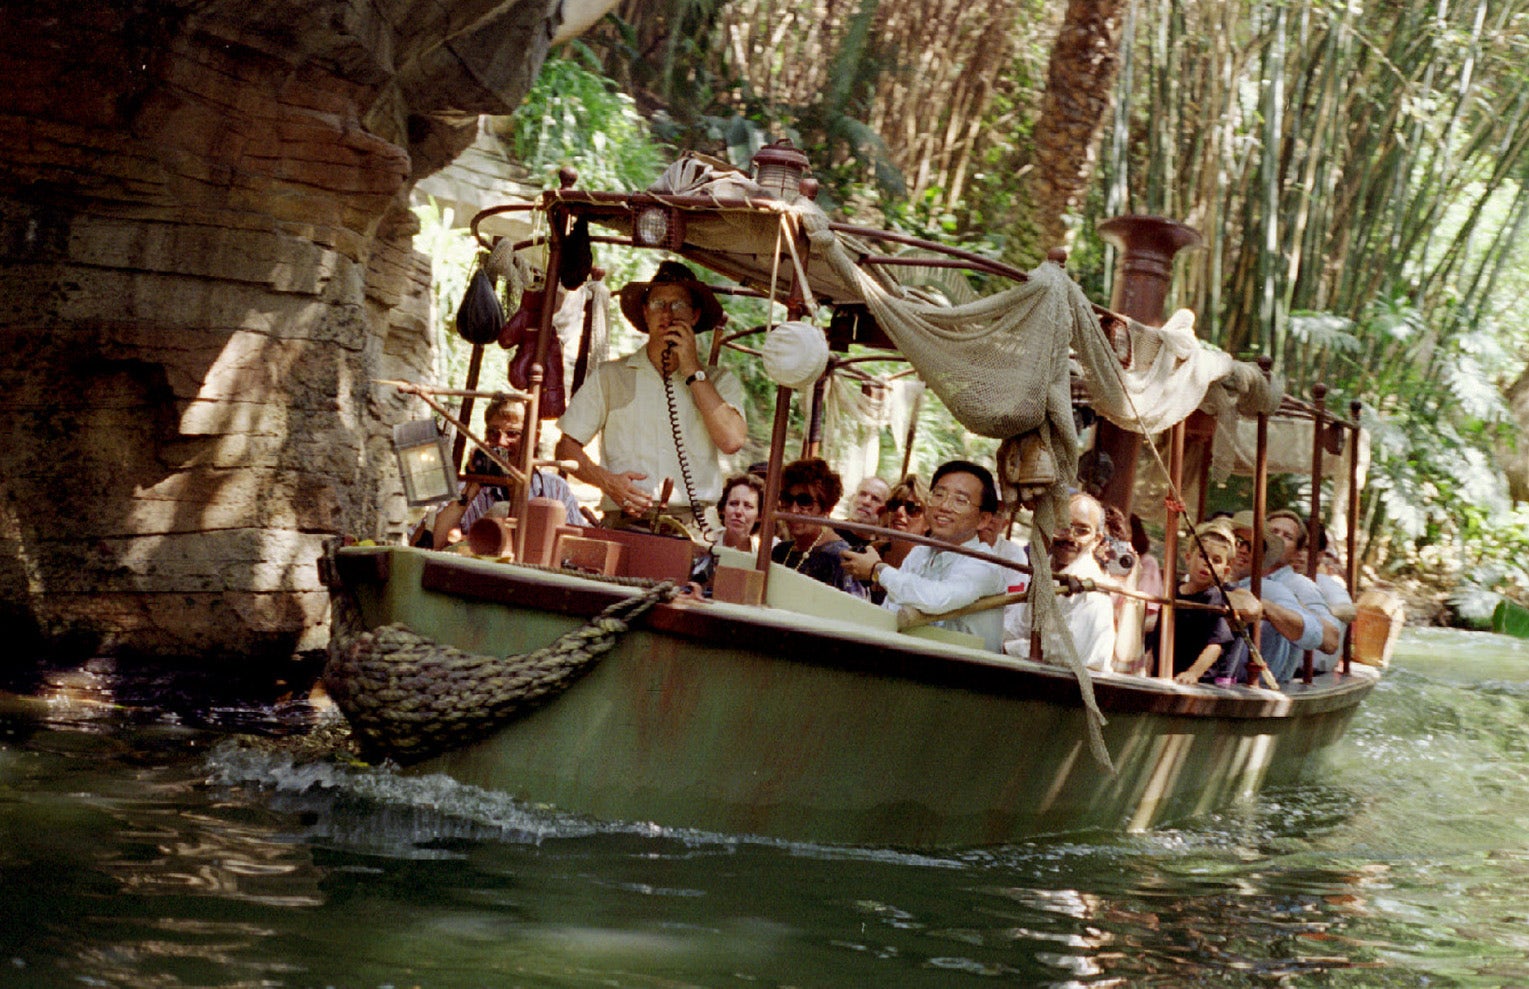 Disney needs to redesign Jungle Cruise ride at theme parks and remove ‘negative portrayals’ of indigenous people